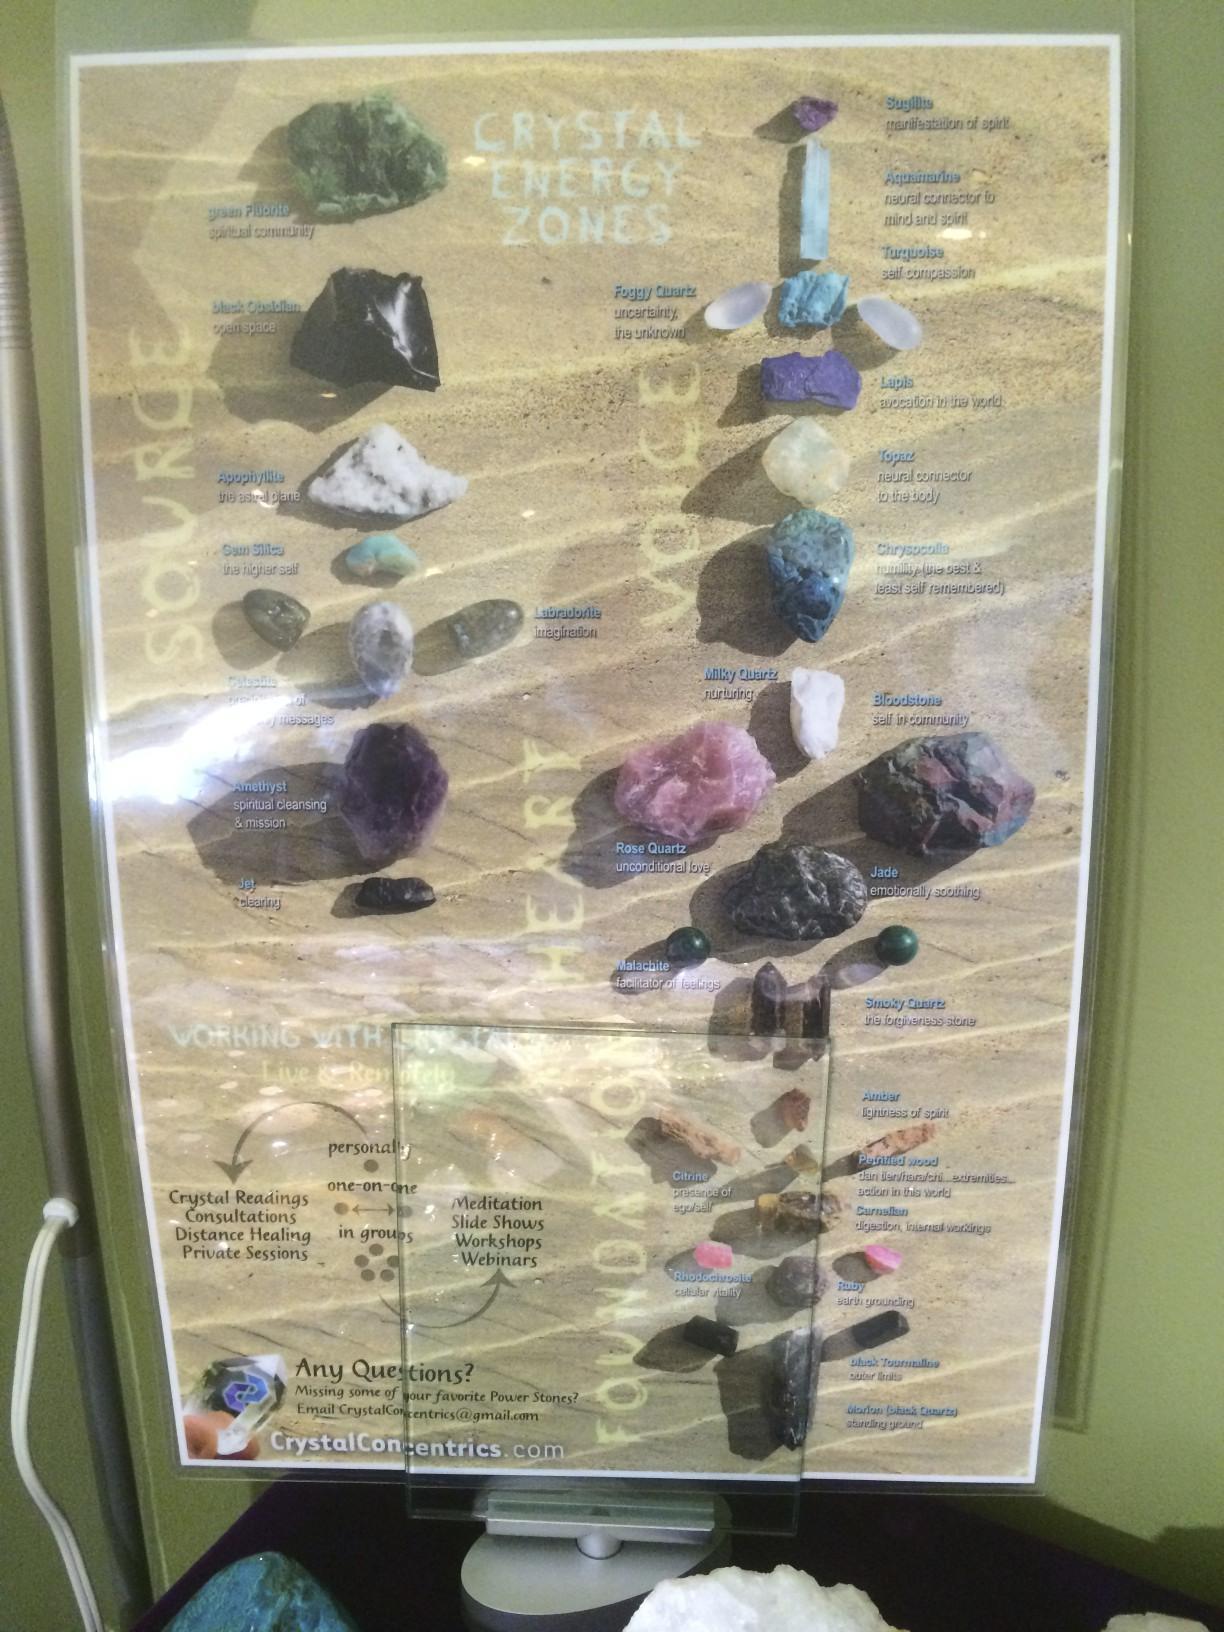 Crystal Energy Zones poster